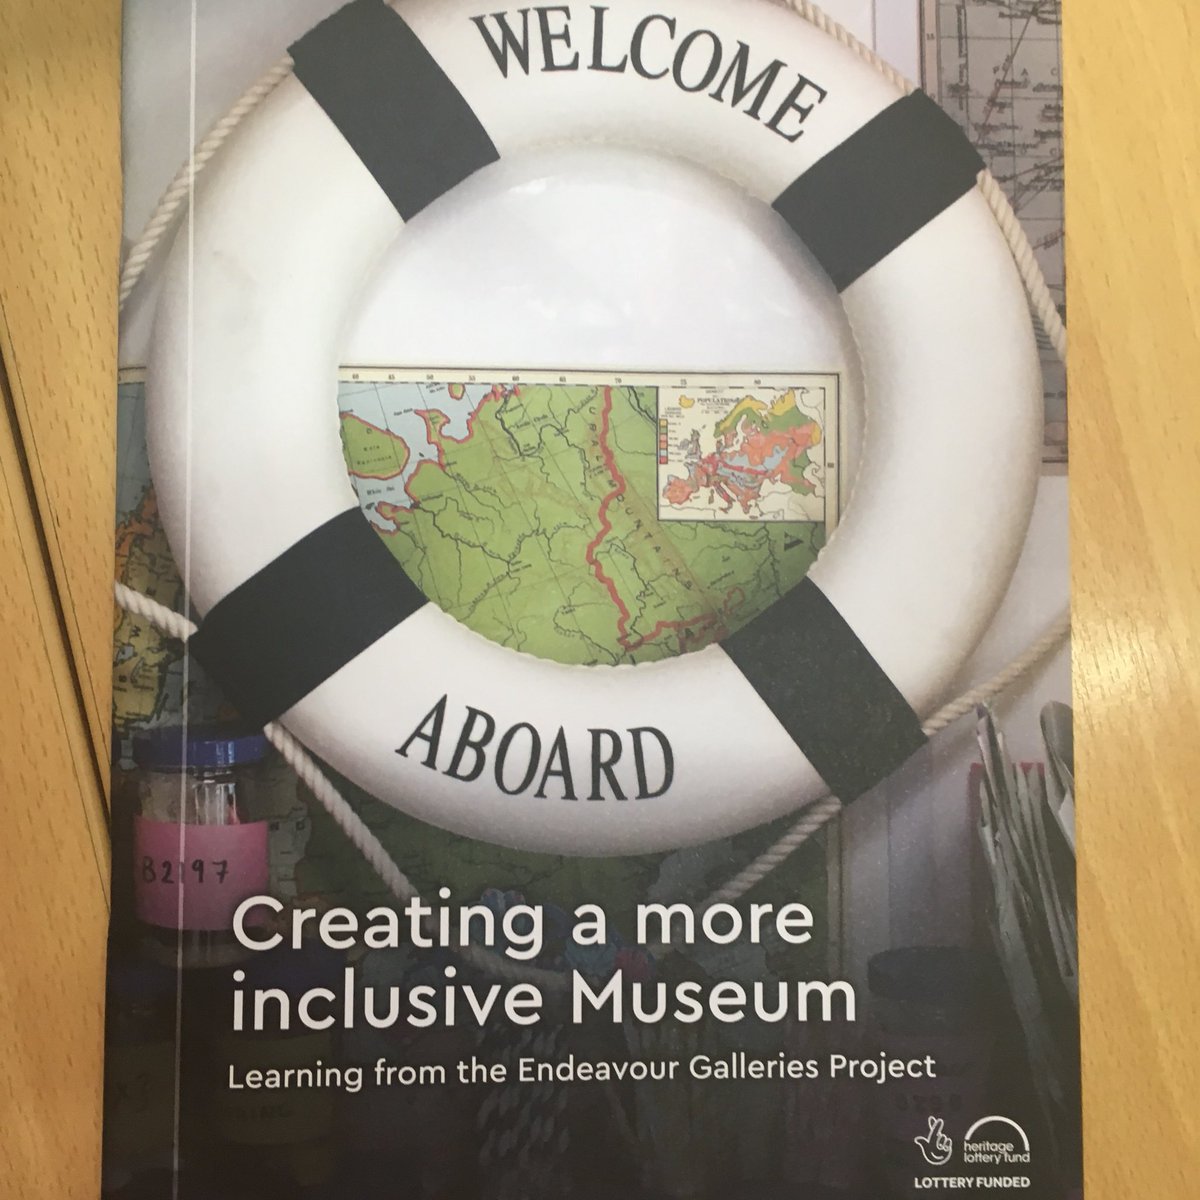 Looking forward to launching our publication sharing learning from the Endeavour Galleries Project @MuseumID @RMGreenwich @HLFLondon #inclusivemuseums museum-id.com/museum-ideas-2…